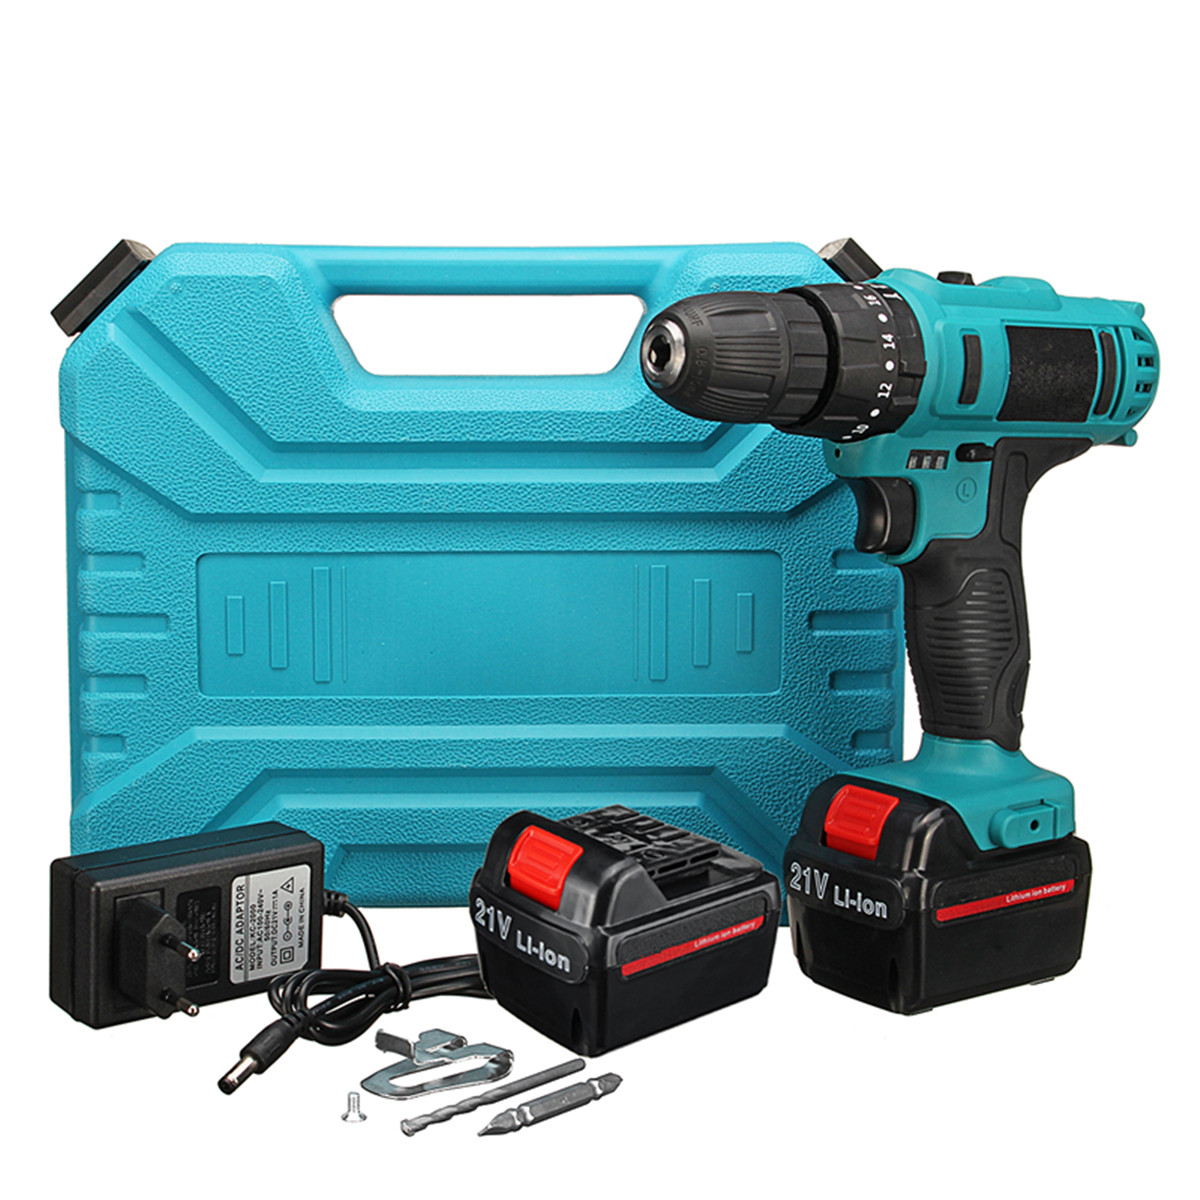 21V-Cordless-Impact-Power-Drill-Electric-Screwdriver-Set-with-2-Li-ion-Batteries-1372018-3